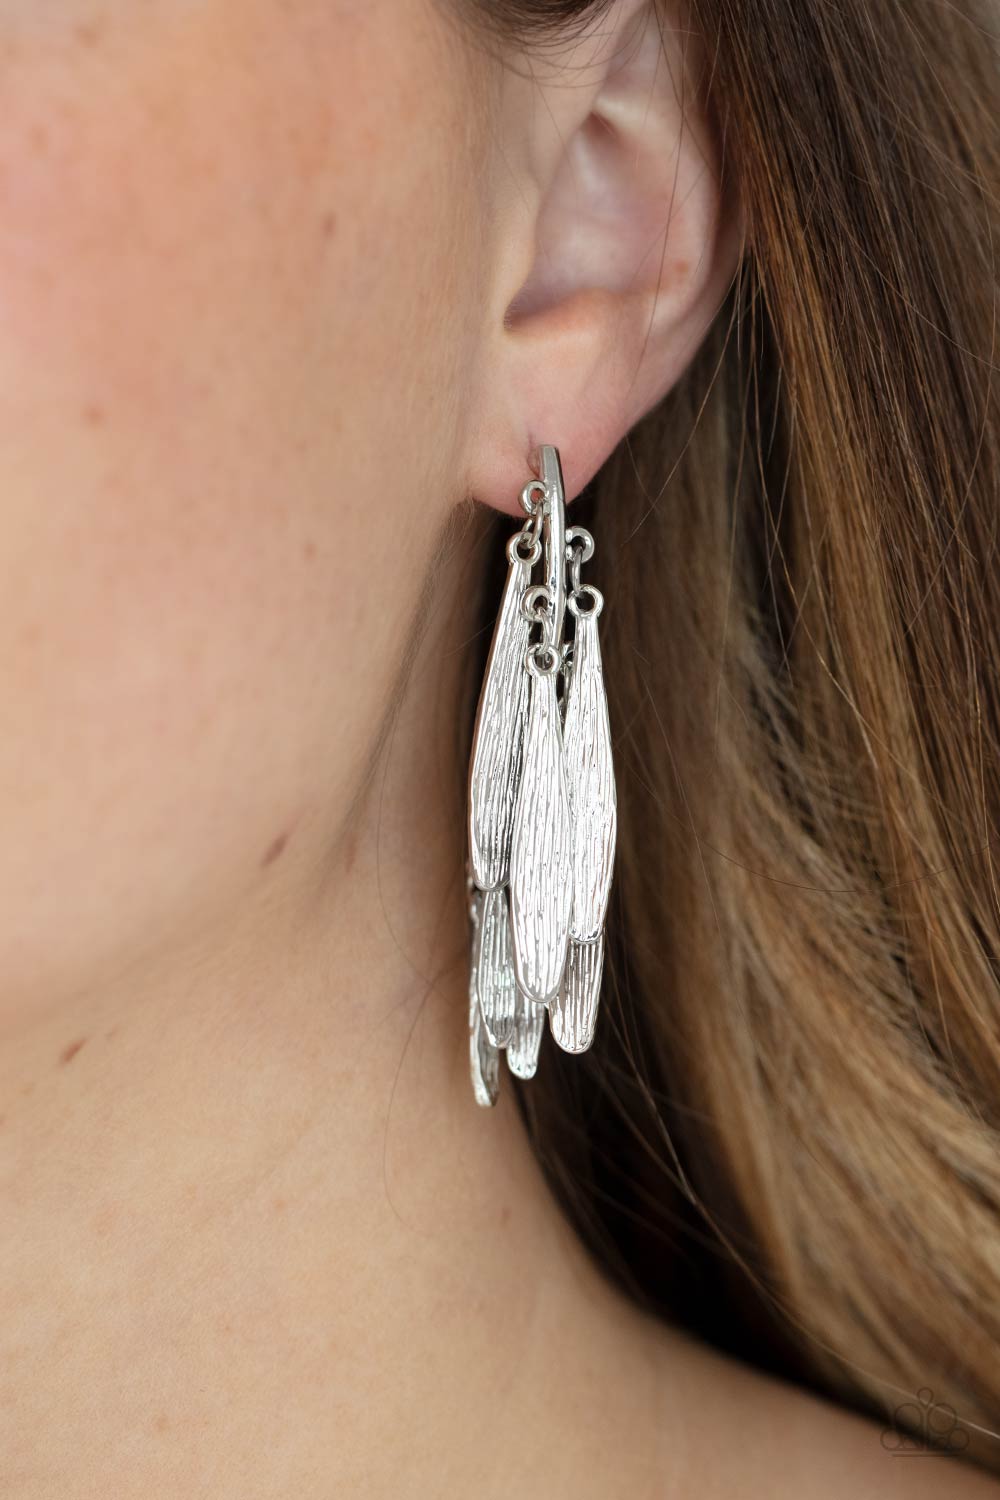 Pursuing The Plumes Silver Earrings - Paparazzi Accessories- lightbox - CarasShop.com - $5 Jewelry by Cara Jewels